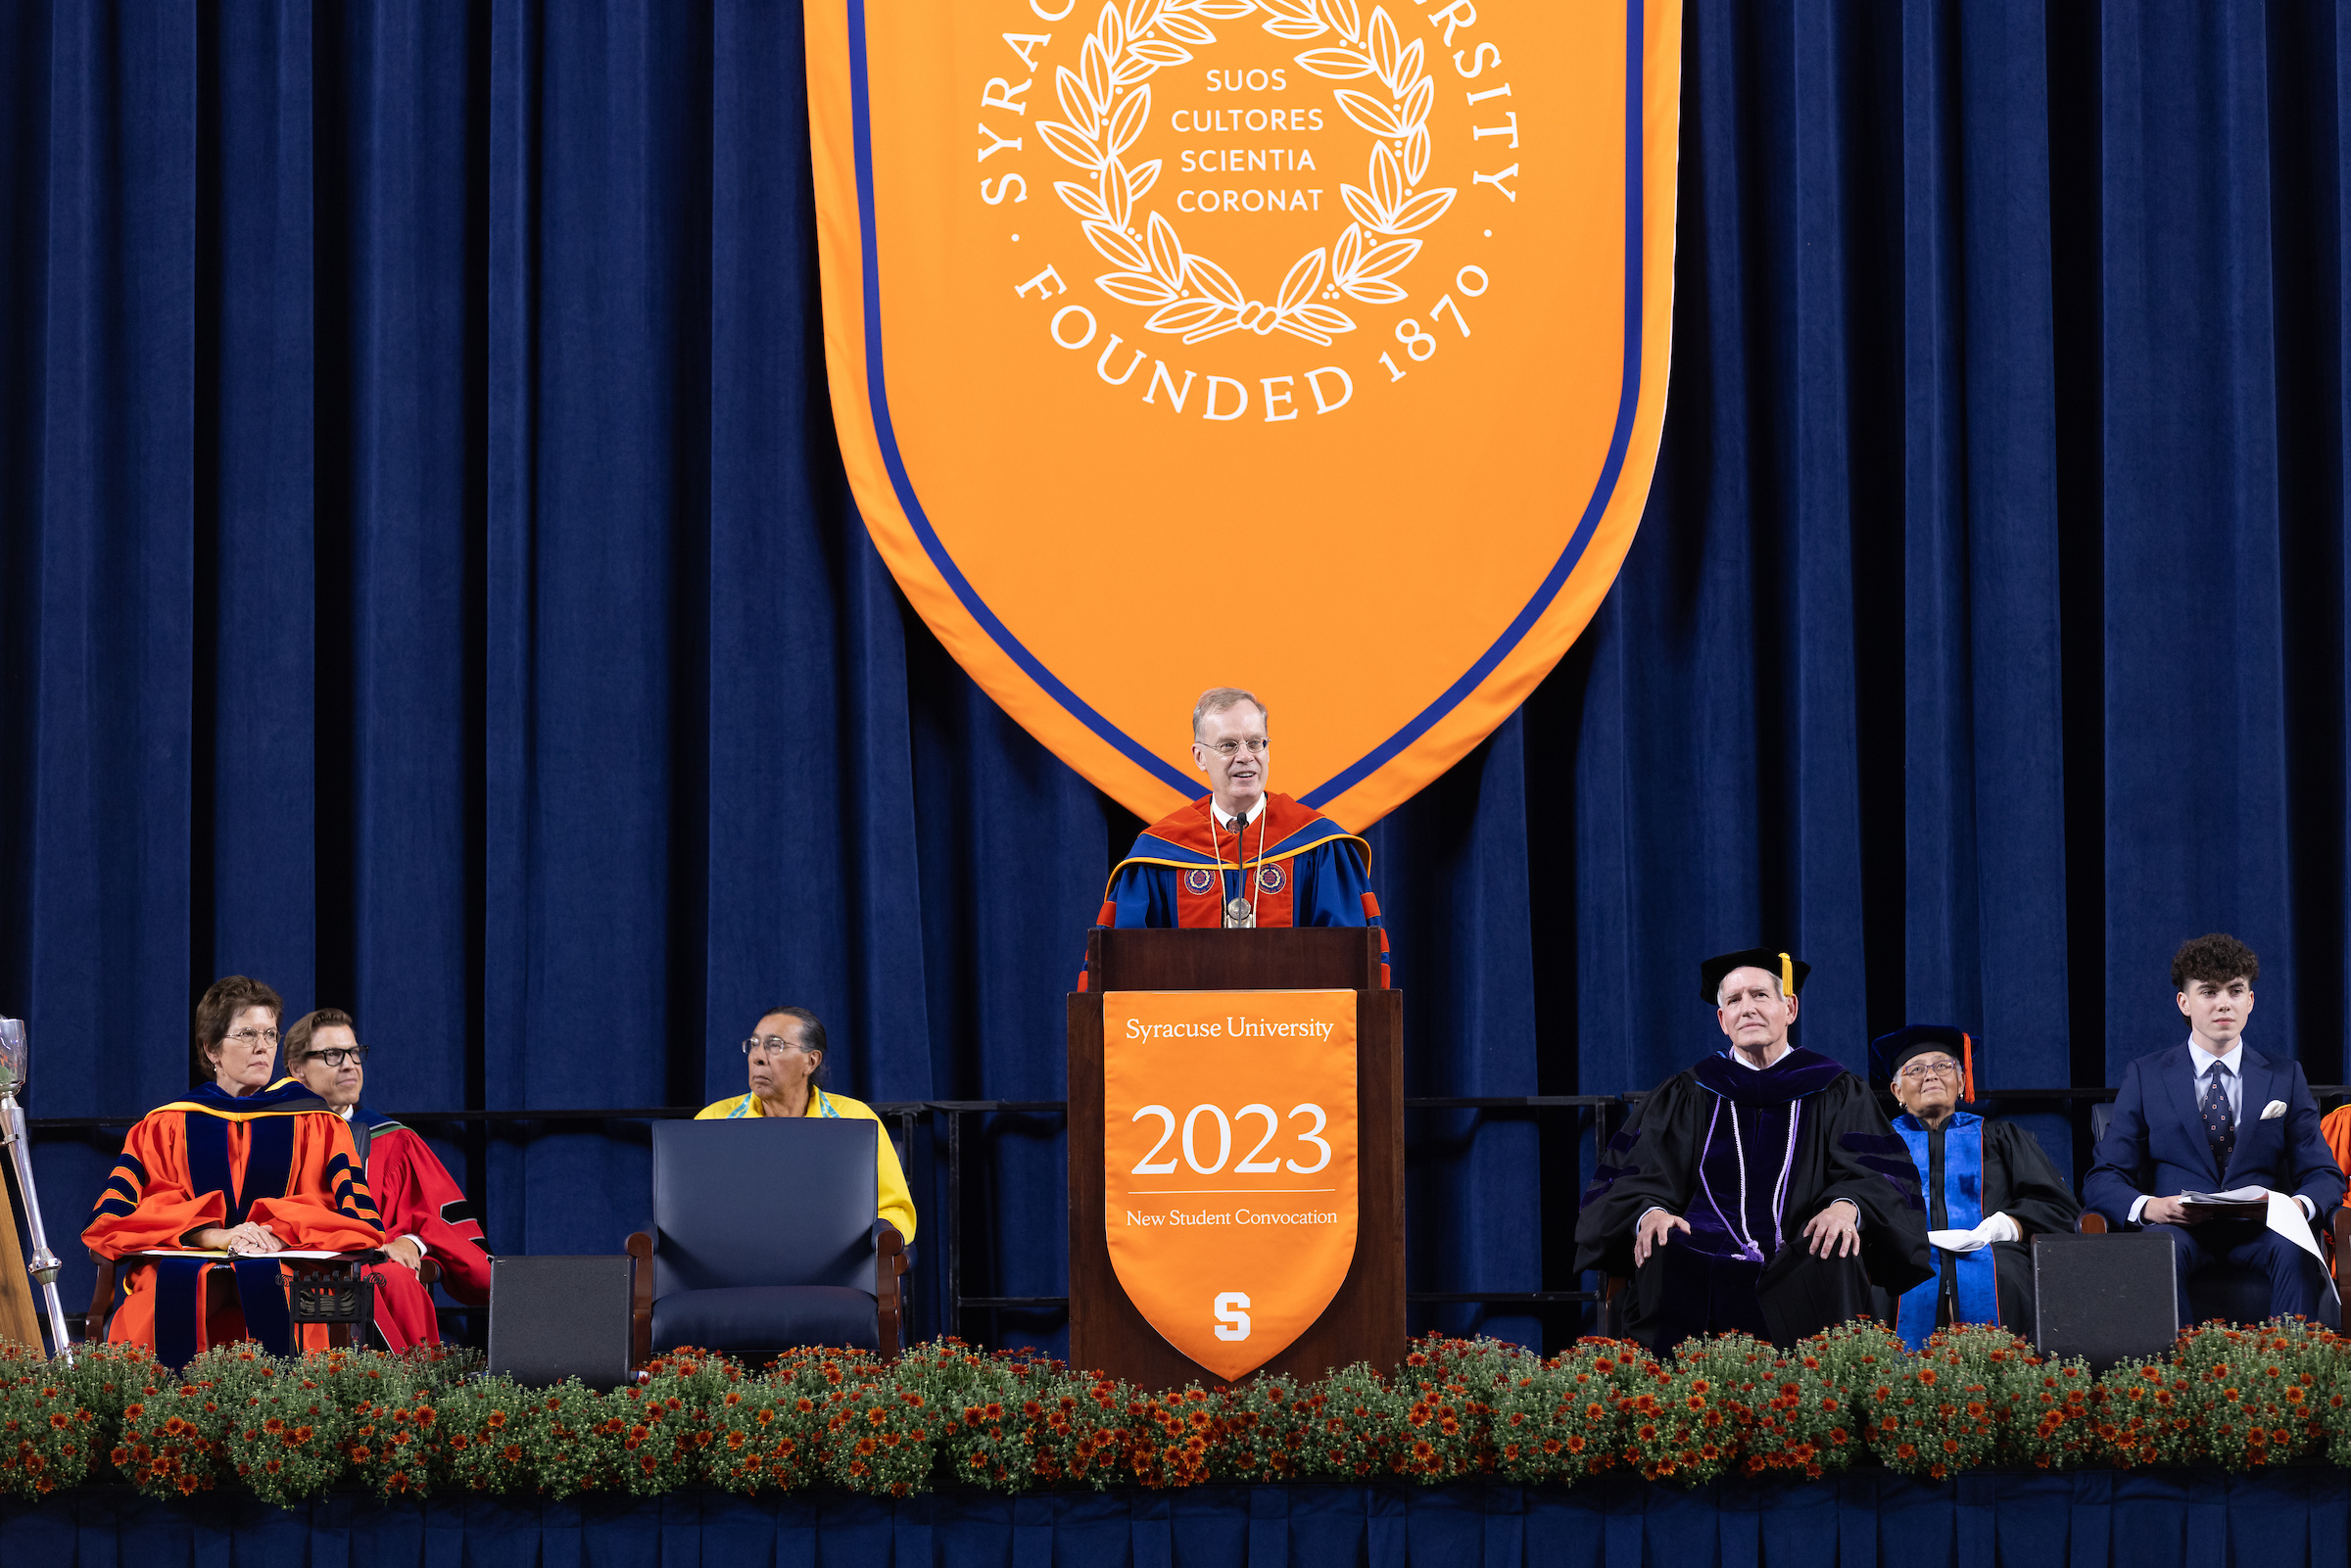 Chancellor standing at the podium speaking on stage with other sitting on the stage nearby